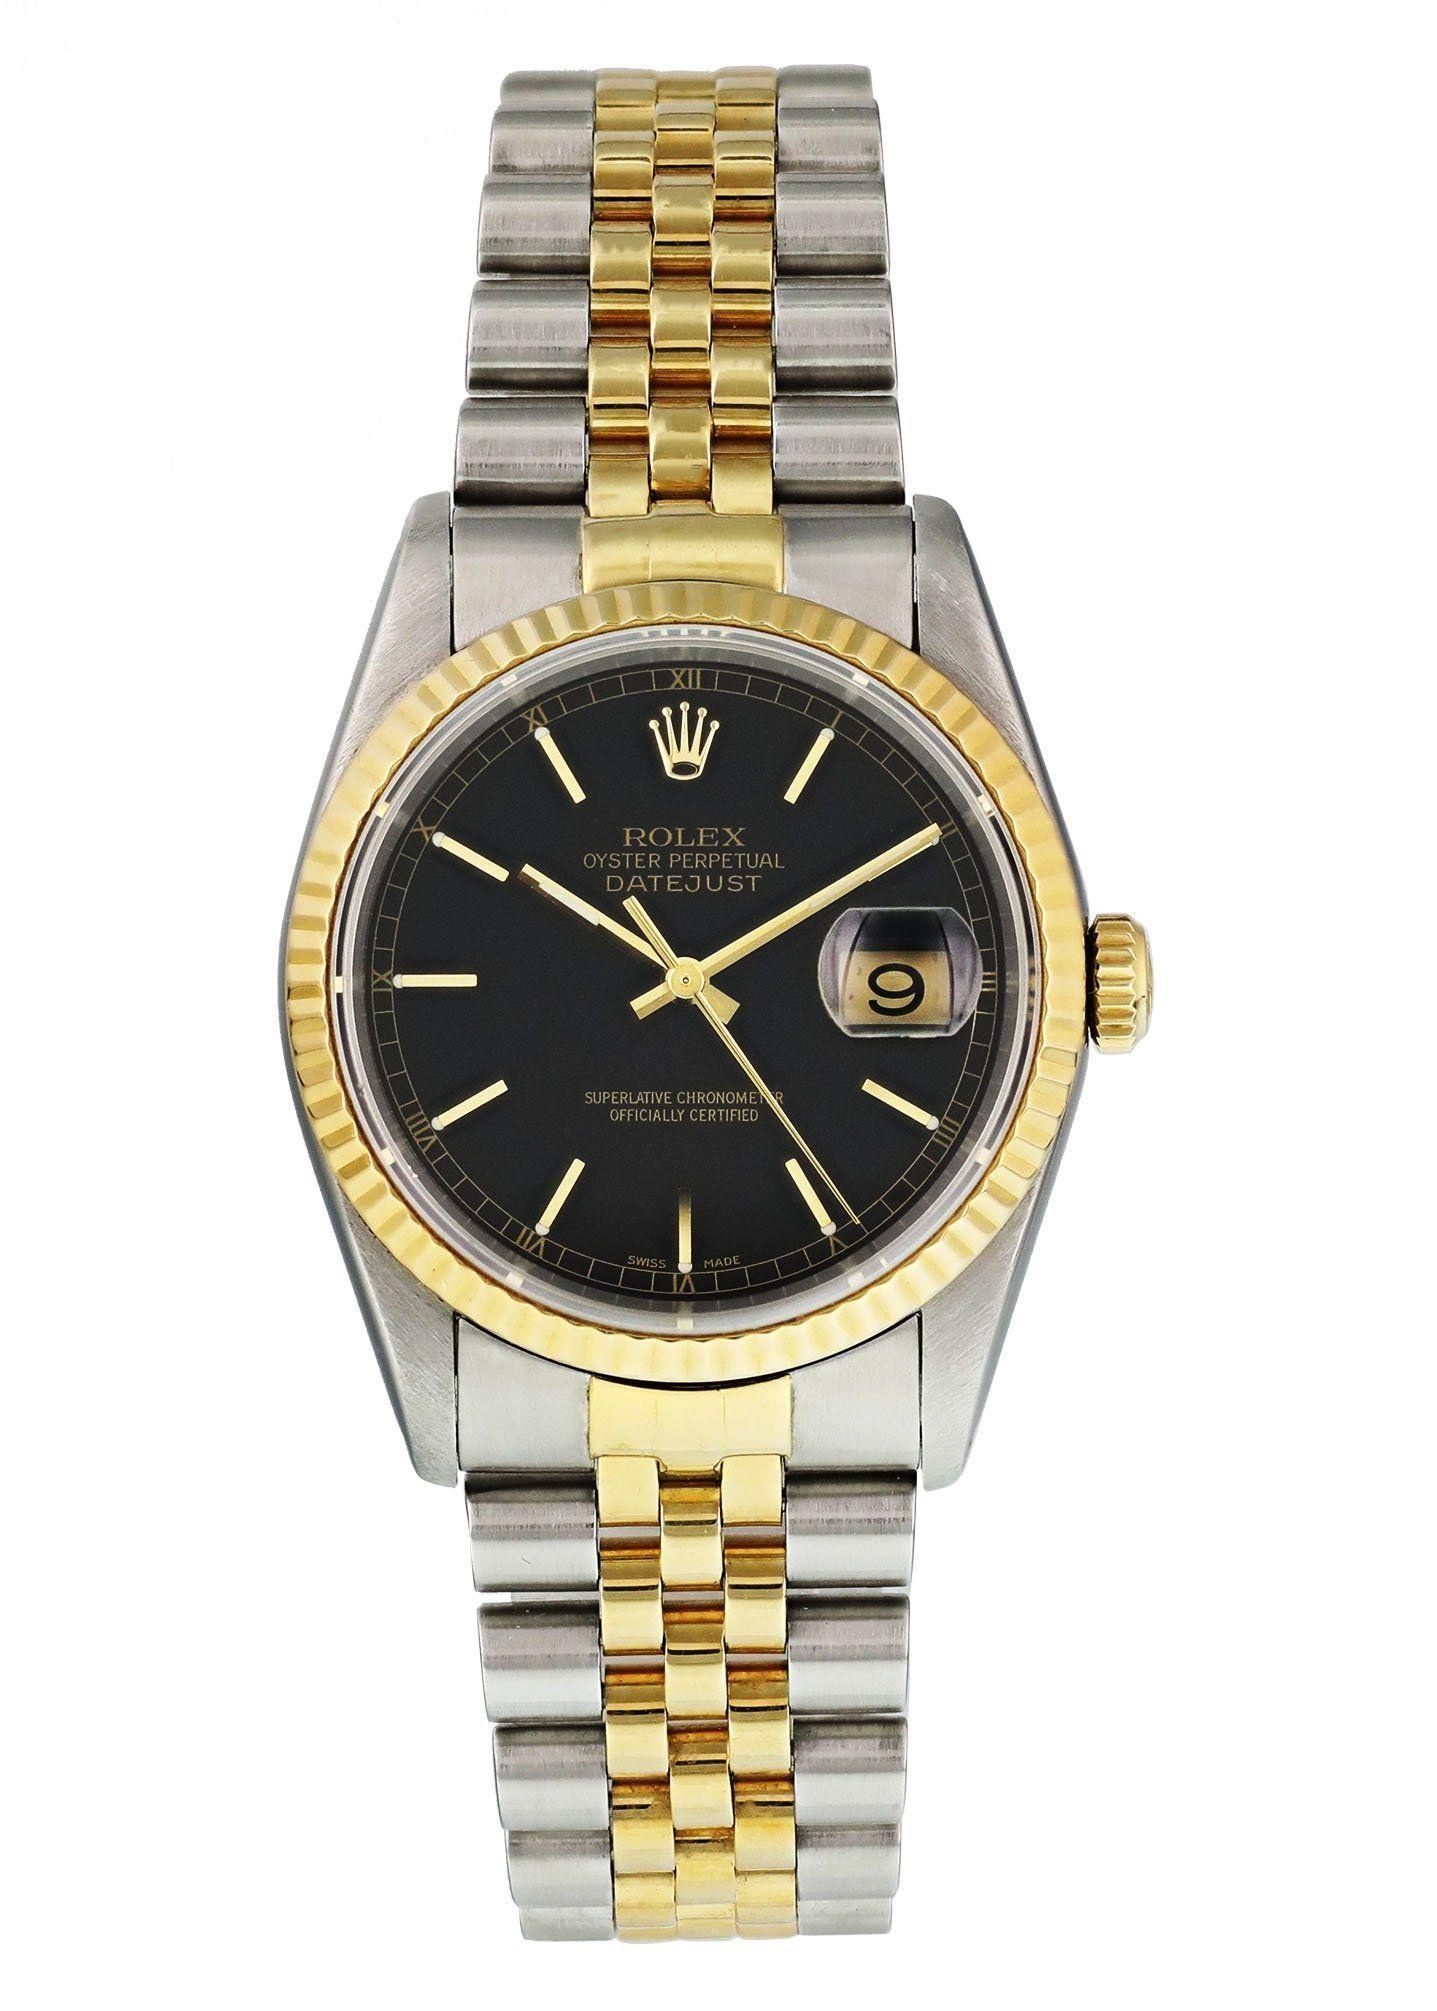 Rolex Datejust 16233 Men Watch. 
36mm Stainless Steel case. 
Yellow Gold fluted bezel. 
Black dial with luminous gold hands and index hour markers. 
Roman numeral hour markers on the outer dial. 
Minute markers on the outer dial. 
Date display at